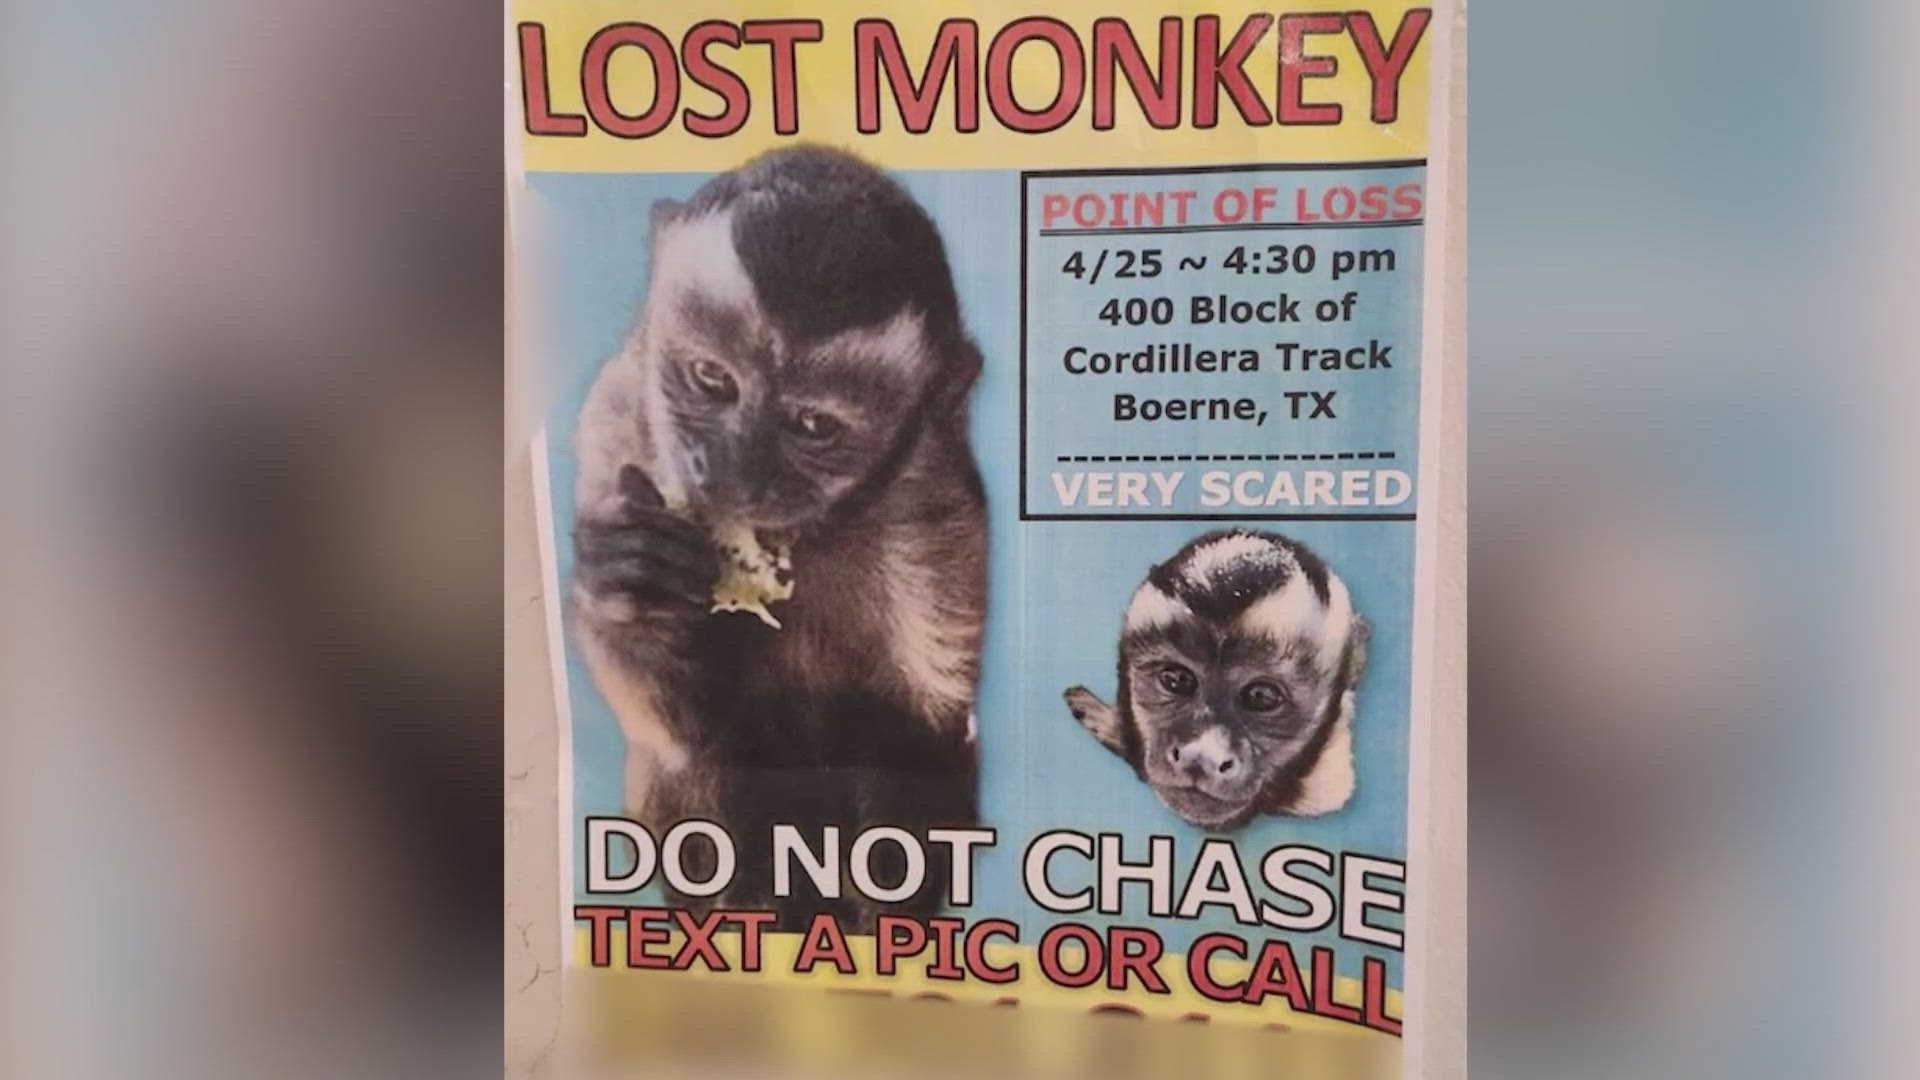 Monkey on the loose in Boerne